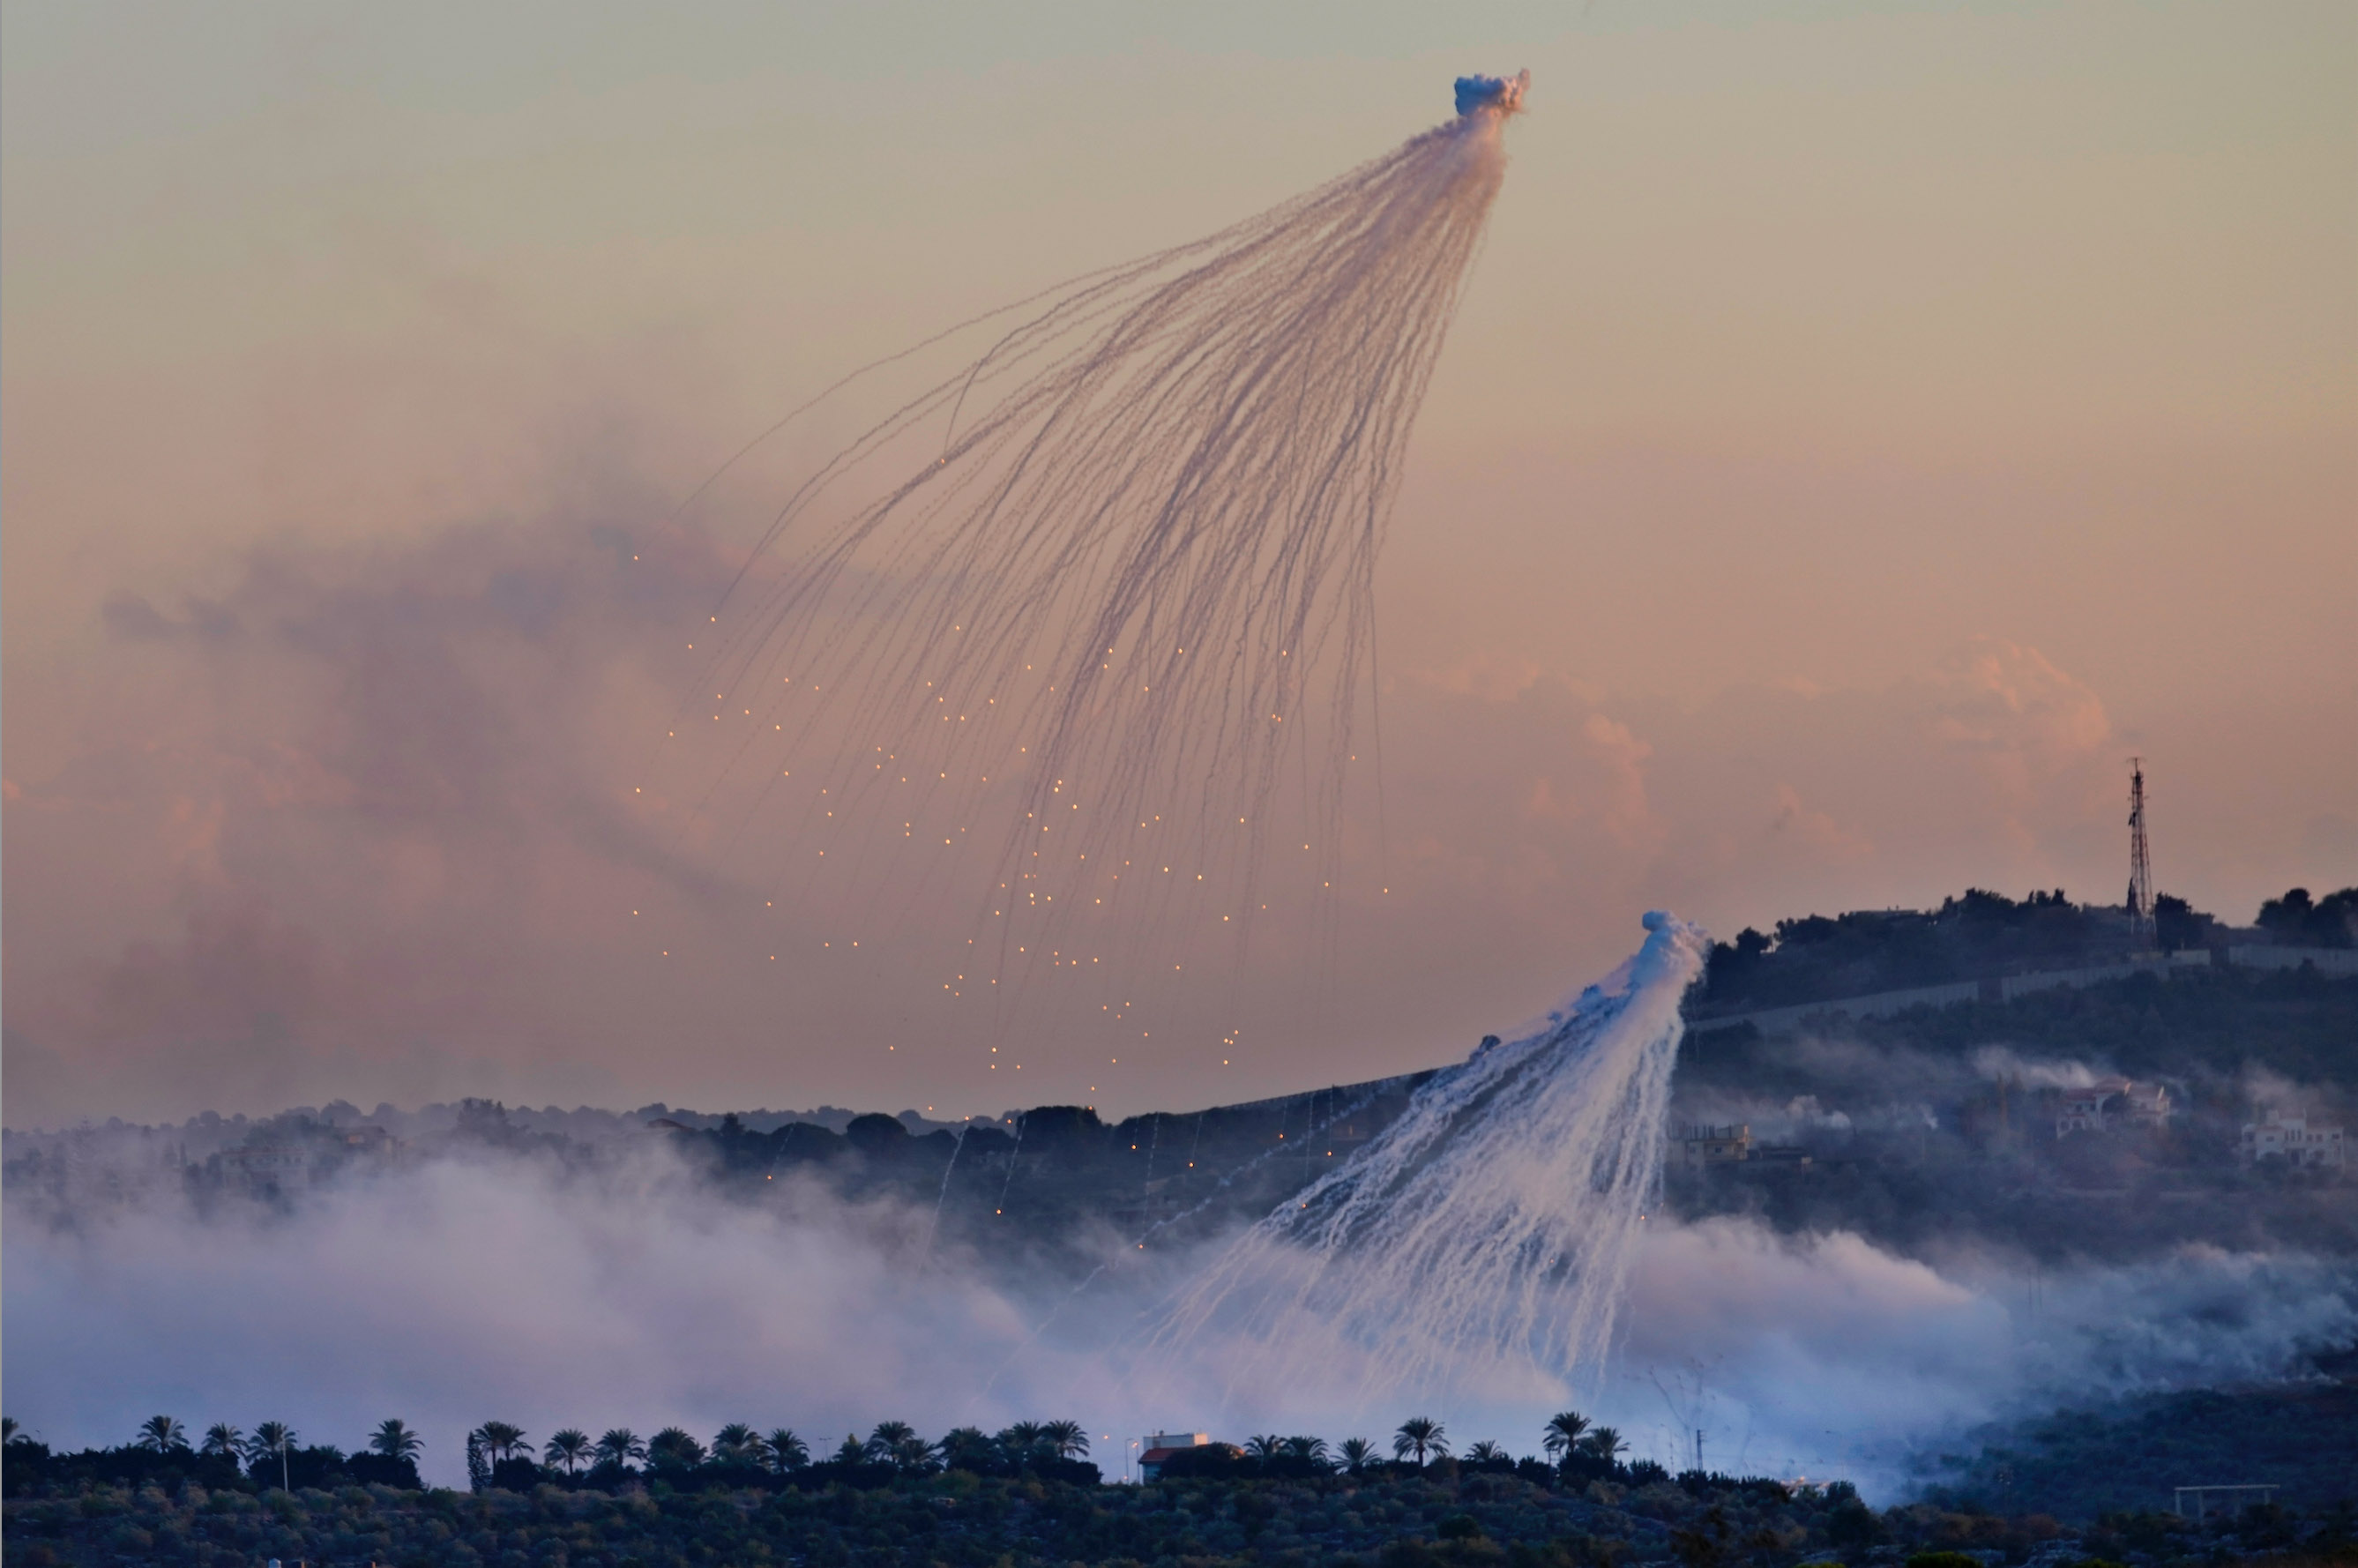 This image, taken on 16 October over Dhayra, shows the typical octopus shaped smoke cloud. It's tendrils still alight, as the toxic munitions fall towards the earth. Home to approximately 30 families, Dhayra is surrounded by grazing lands and olive groves